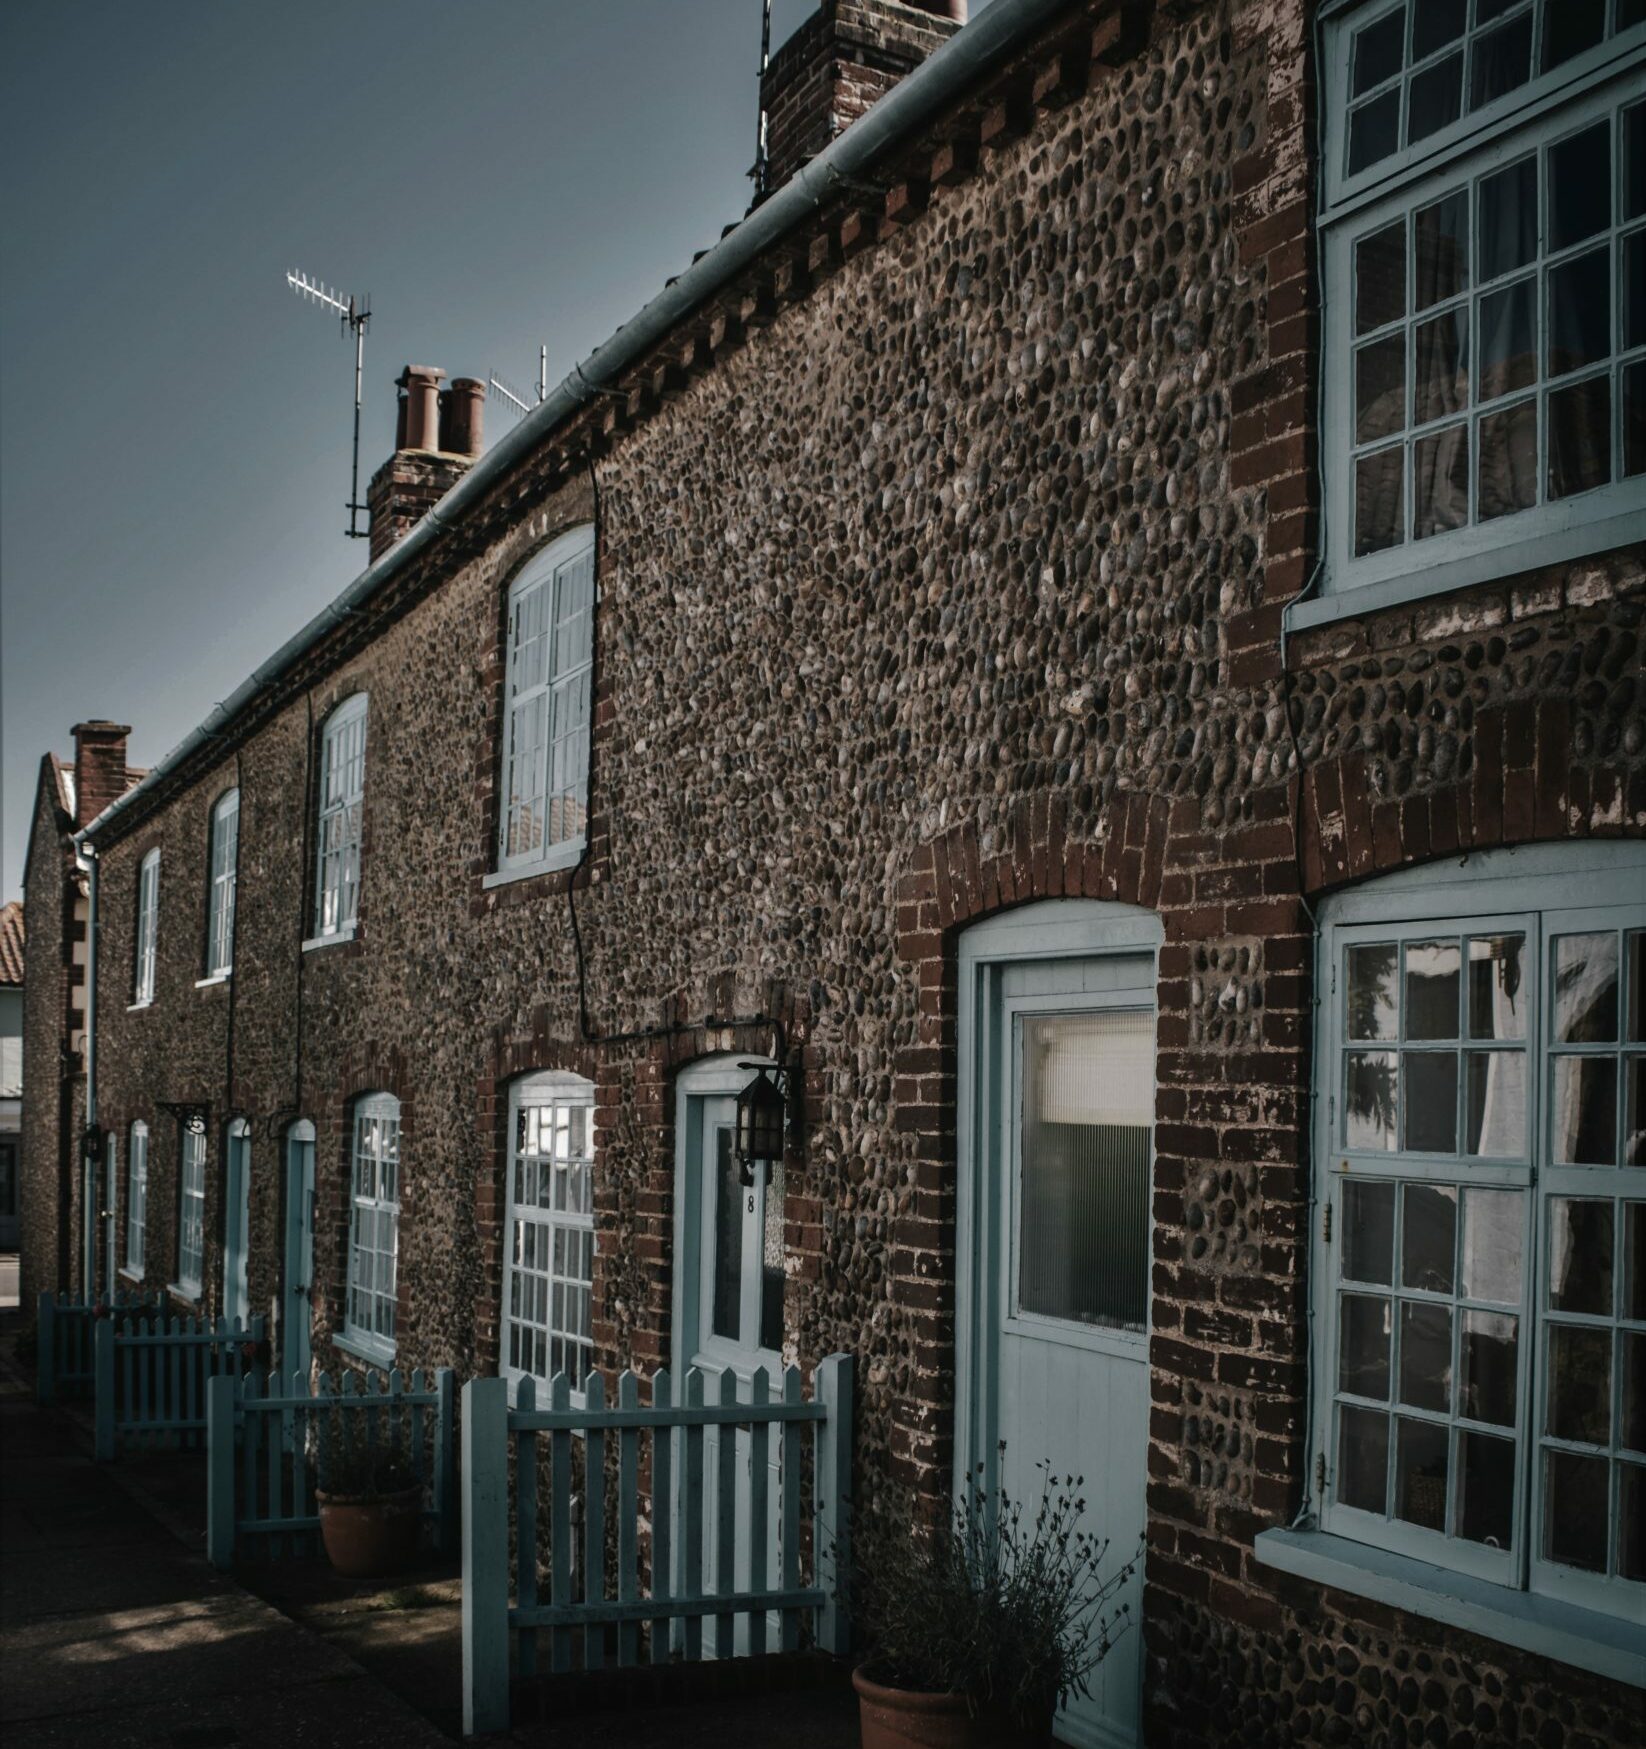 Image if a row of houses in the Uk